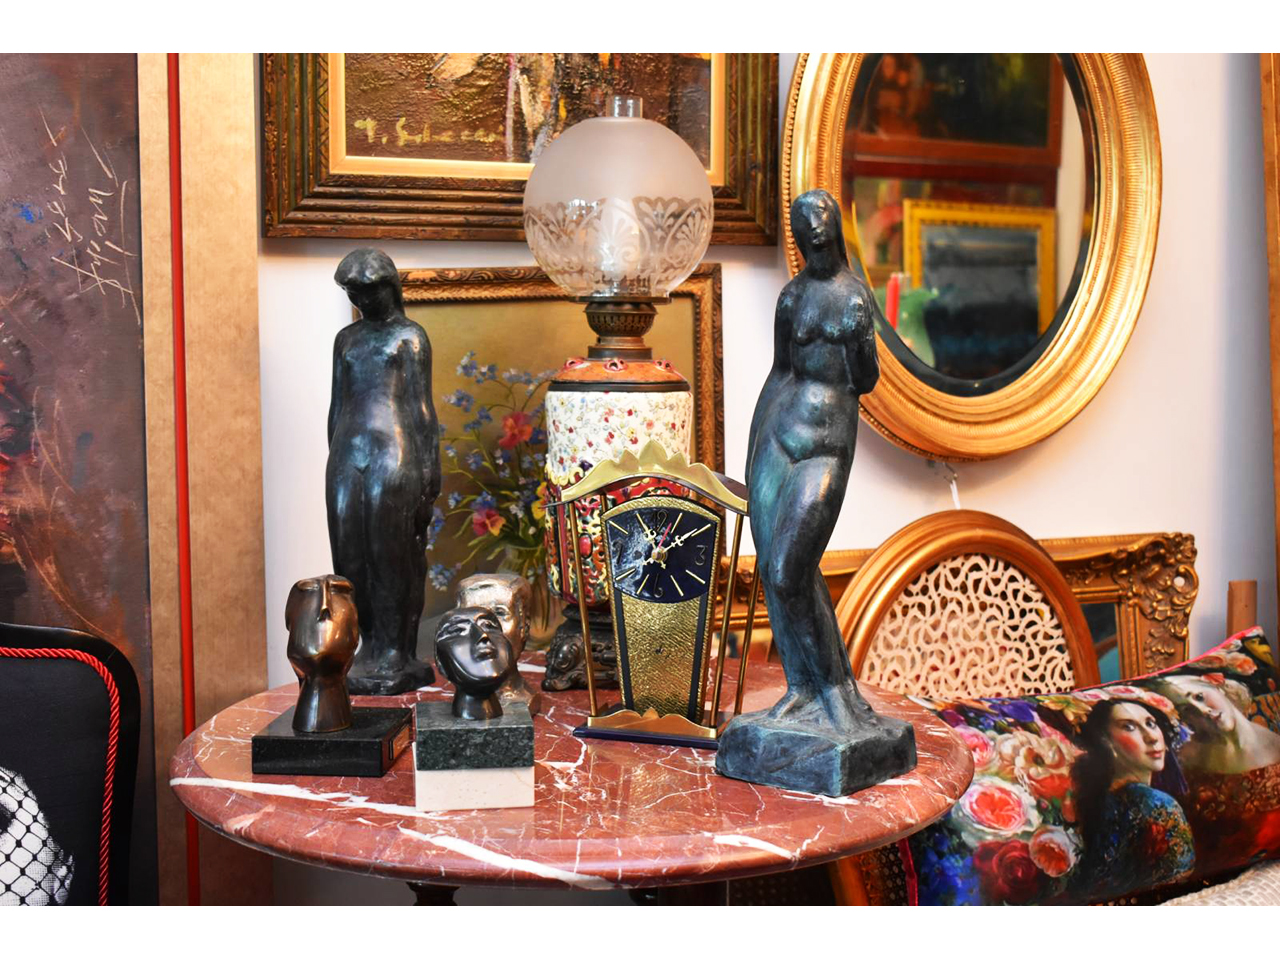 ANTIQUES AND GALLERY MASNA Antique shops Beograd